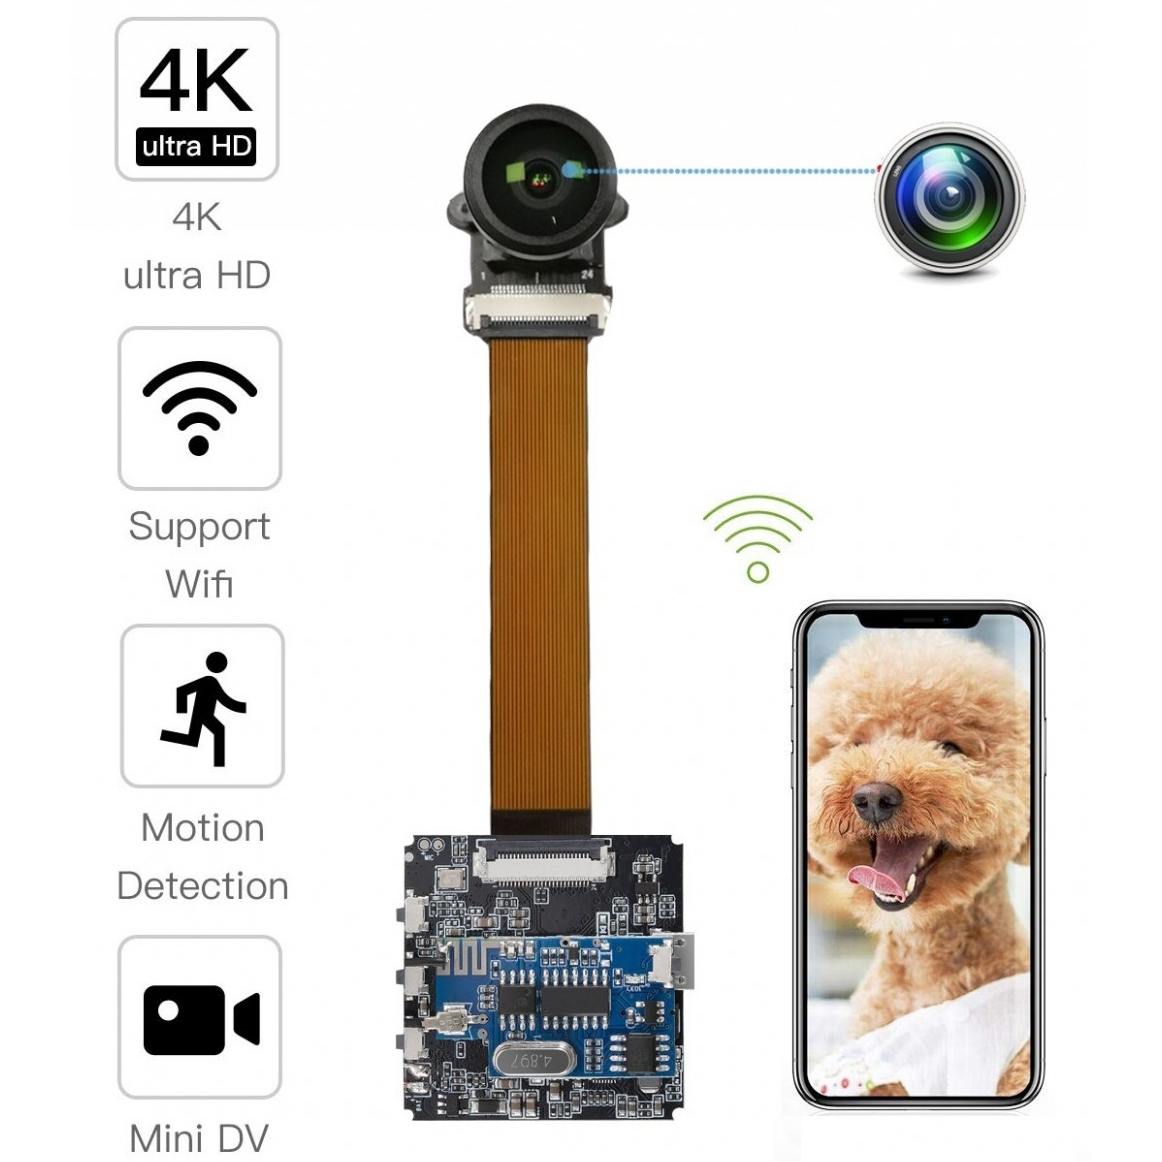 Professional China SPY CAMERAS WITH AUDIO AND VIDEO-
 4K Real Ultra HD DIY Wireless Camera Big Wide Angle 6CM Mini DVR Motion Detection Nanny Cam Security System APP Control Action Camera up to 400GB – MATECAM